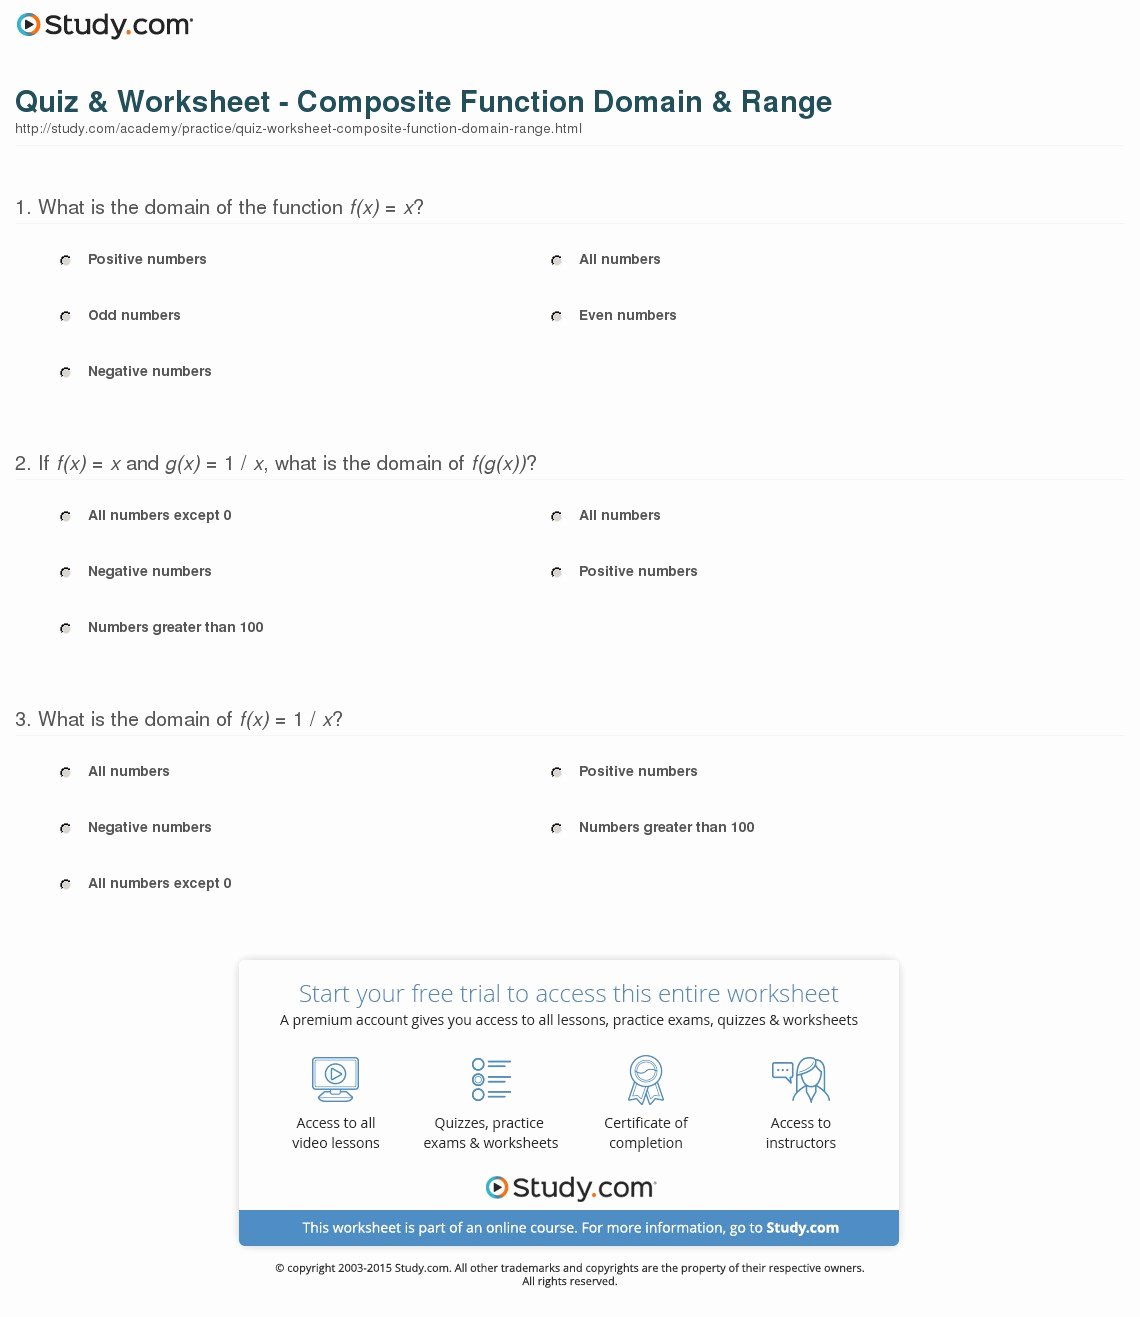 Composite Function Worksheet Answer Key Elegant Quiz & Worksheet Posite Function Domain & Range